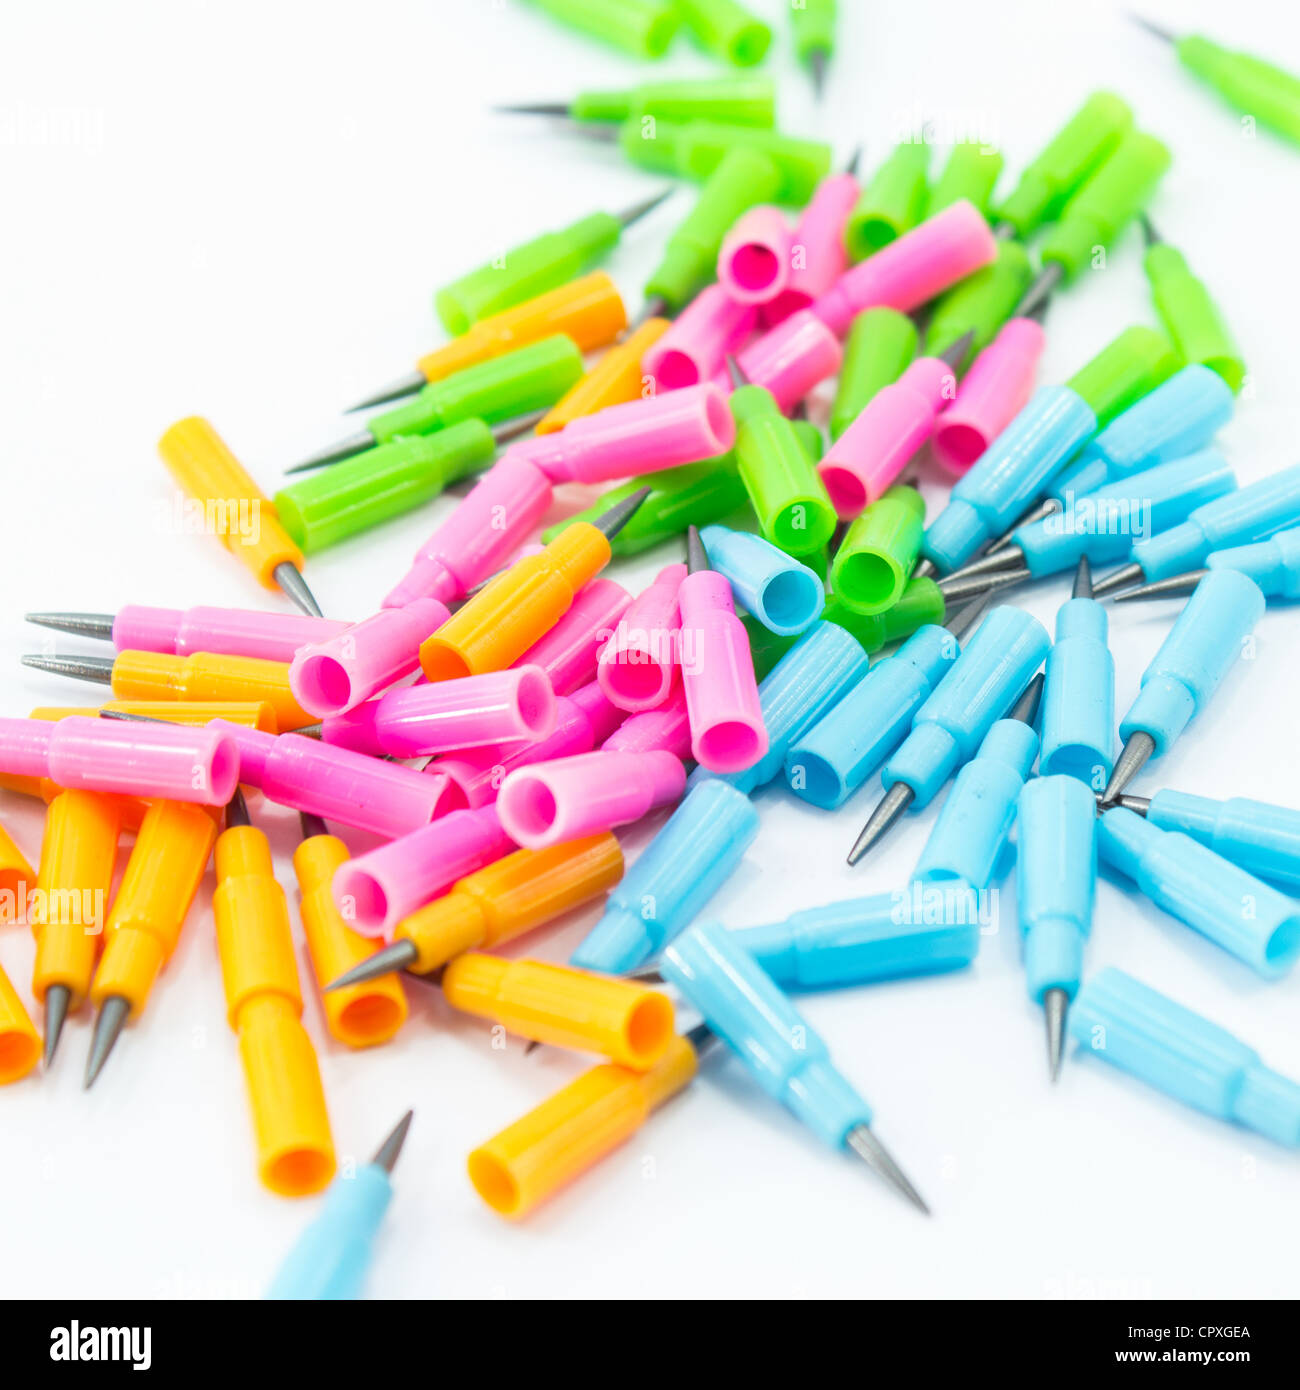 different color of pencil's spare parts Stock Photo